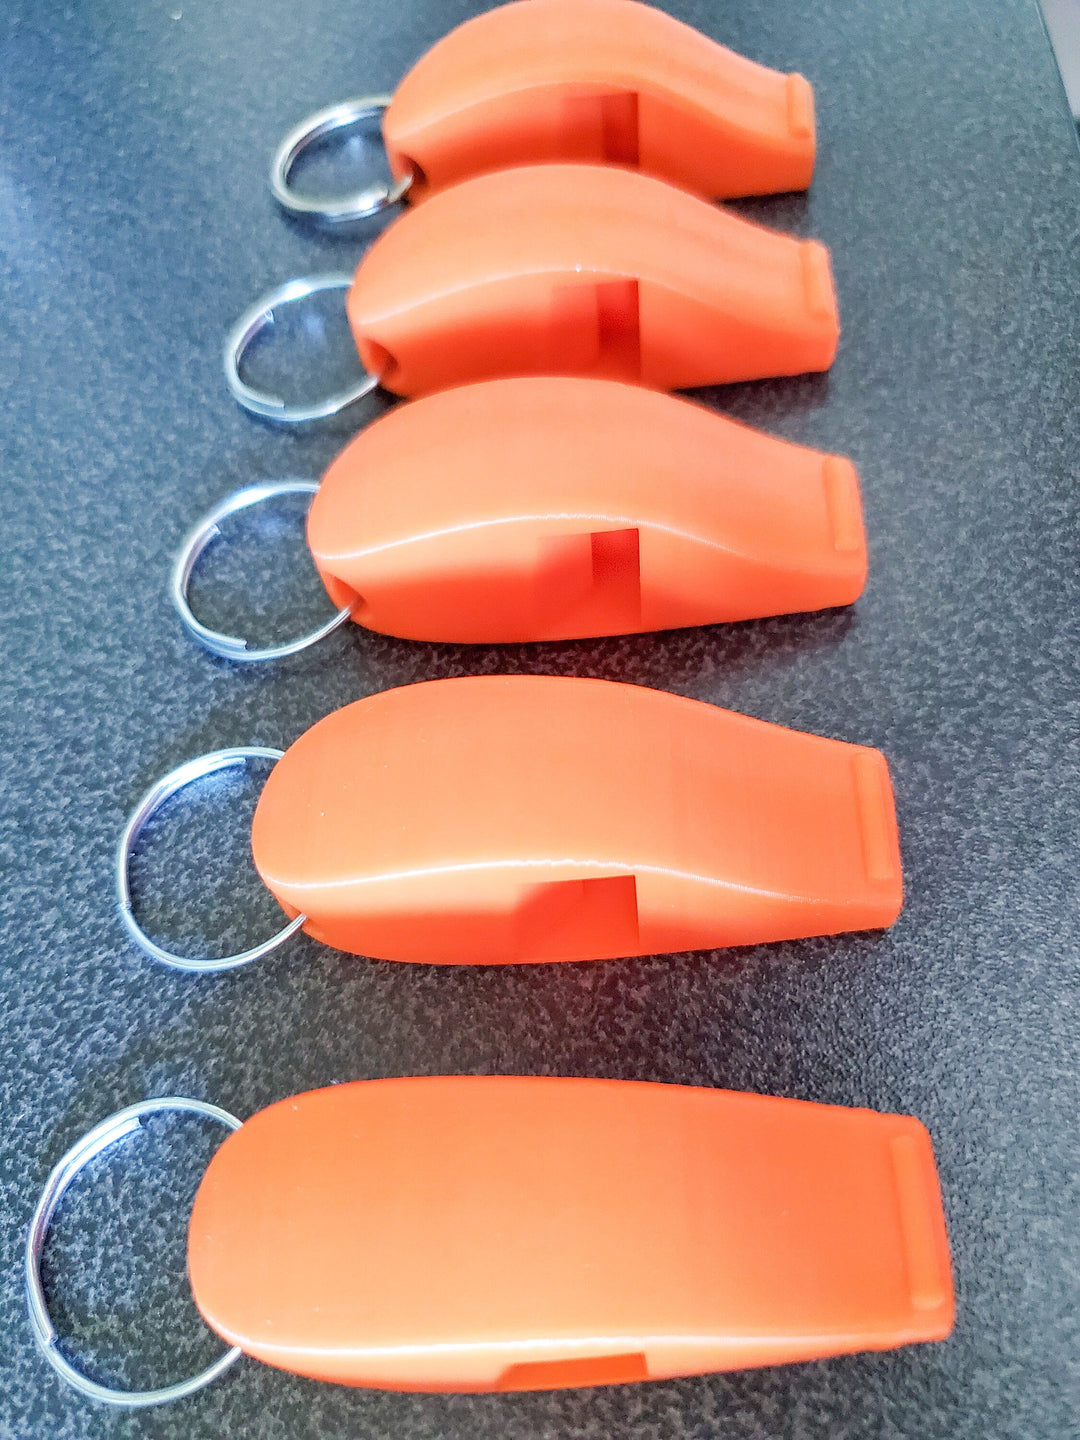 SUPER Loud Whistles Rated at 118db! Safety, Survival, Soccer, Sports, Swimming